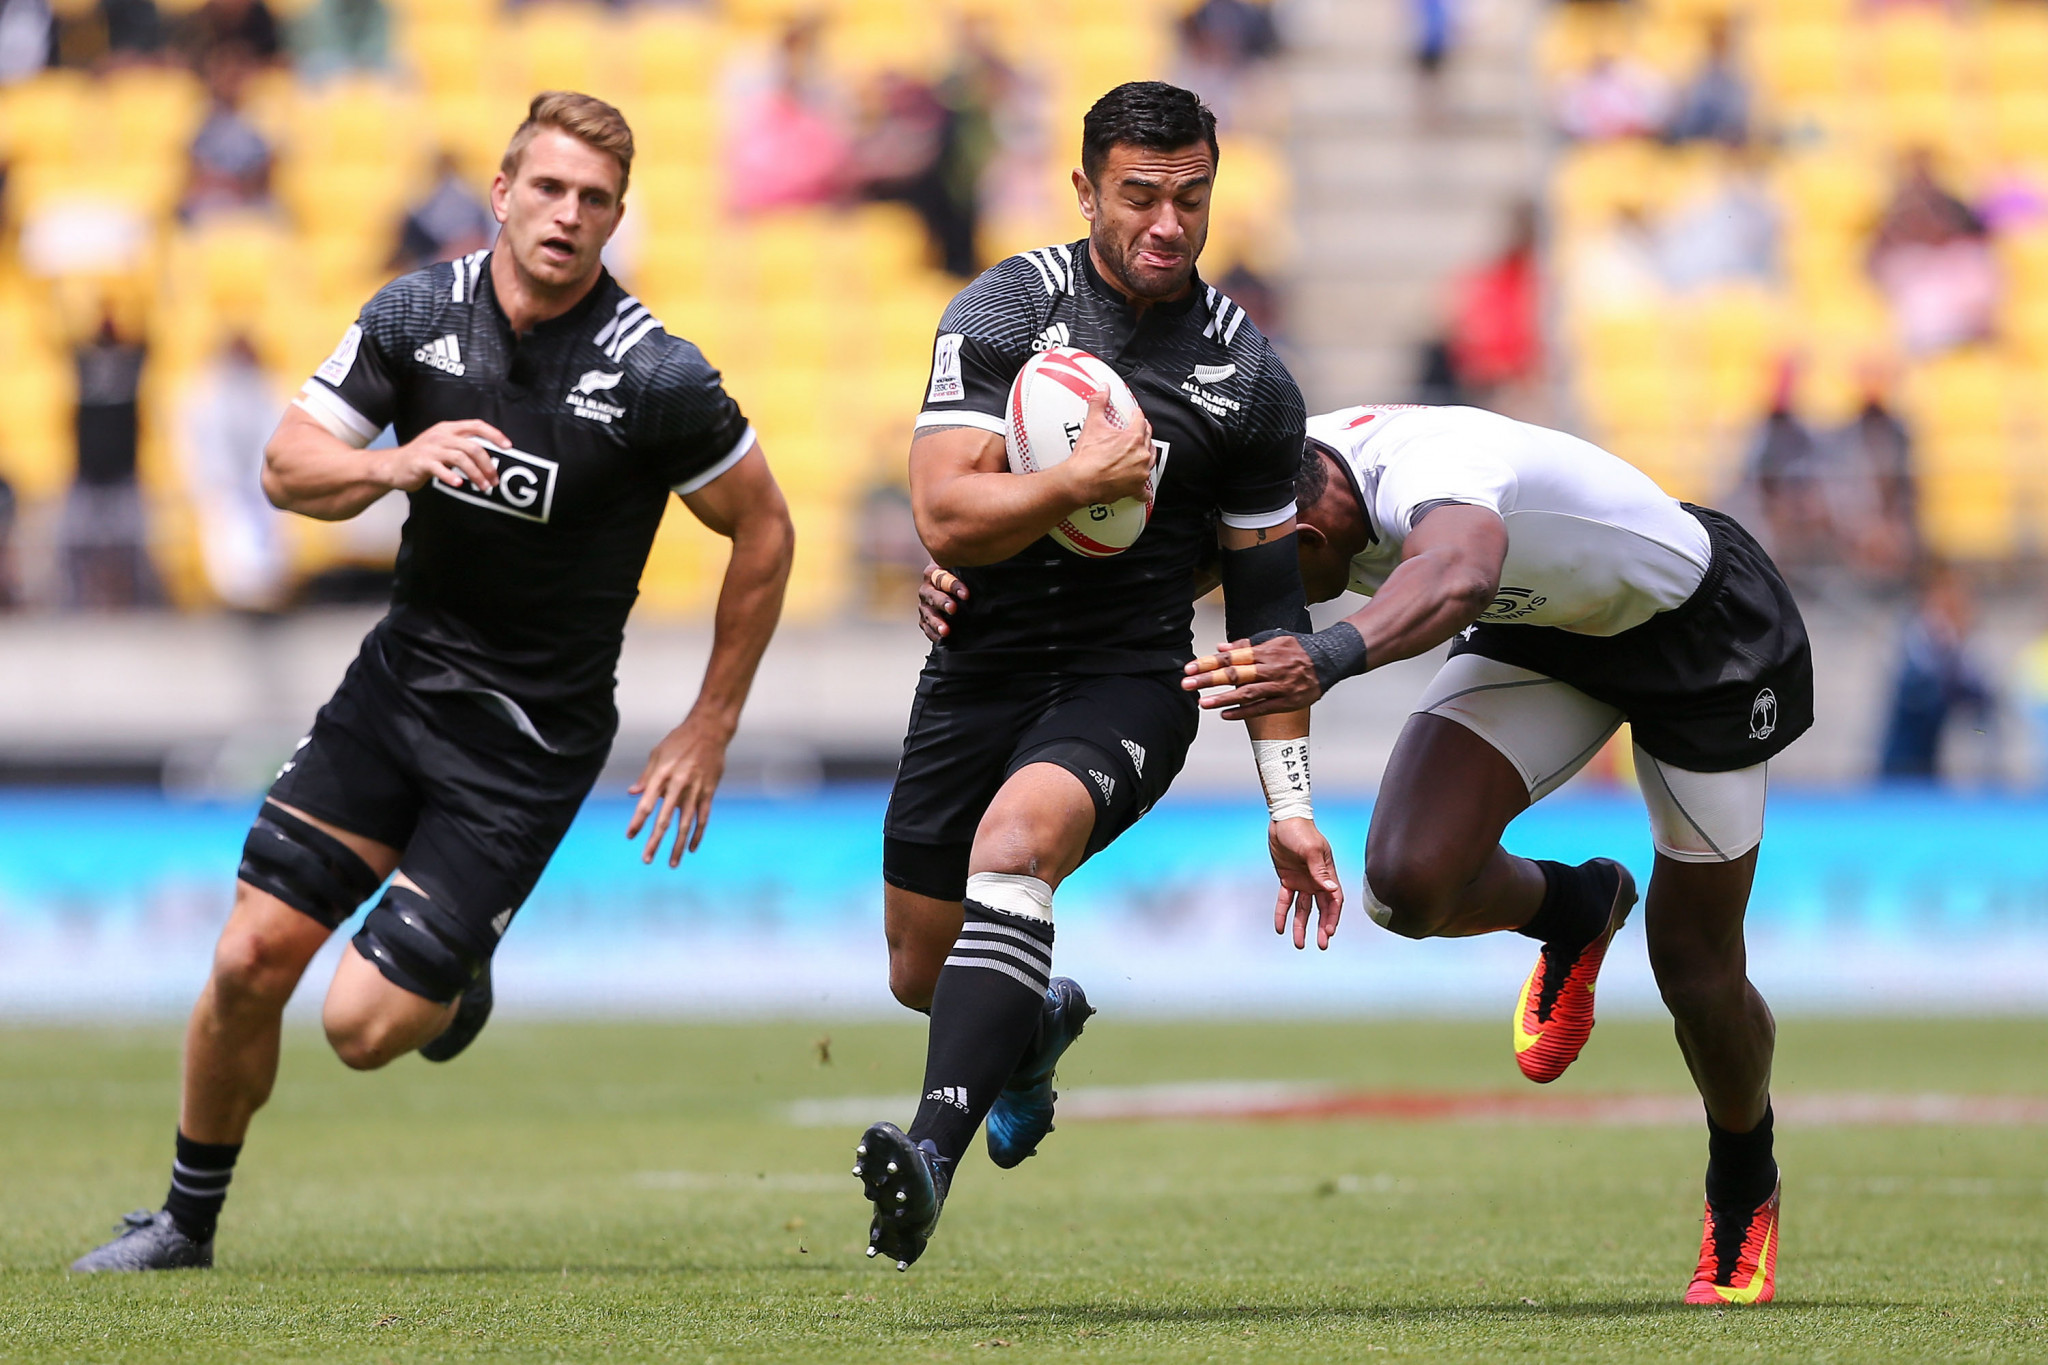 New Zealand win top prizes at World Rugby Sevens Series Awards